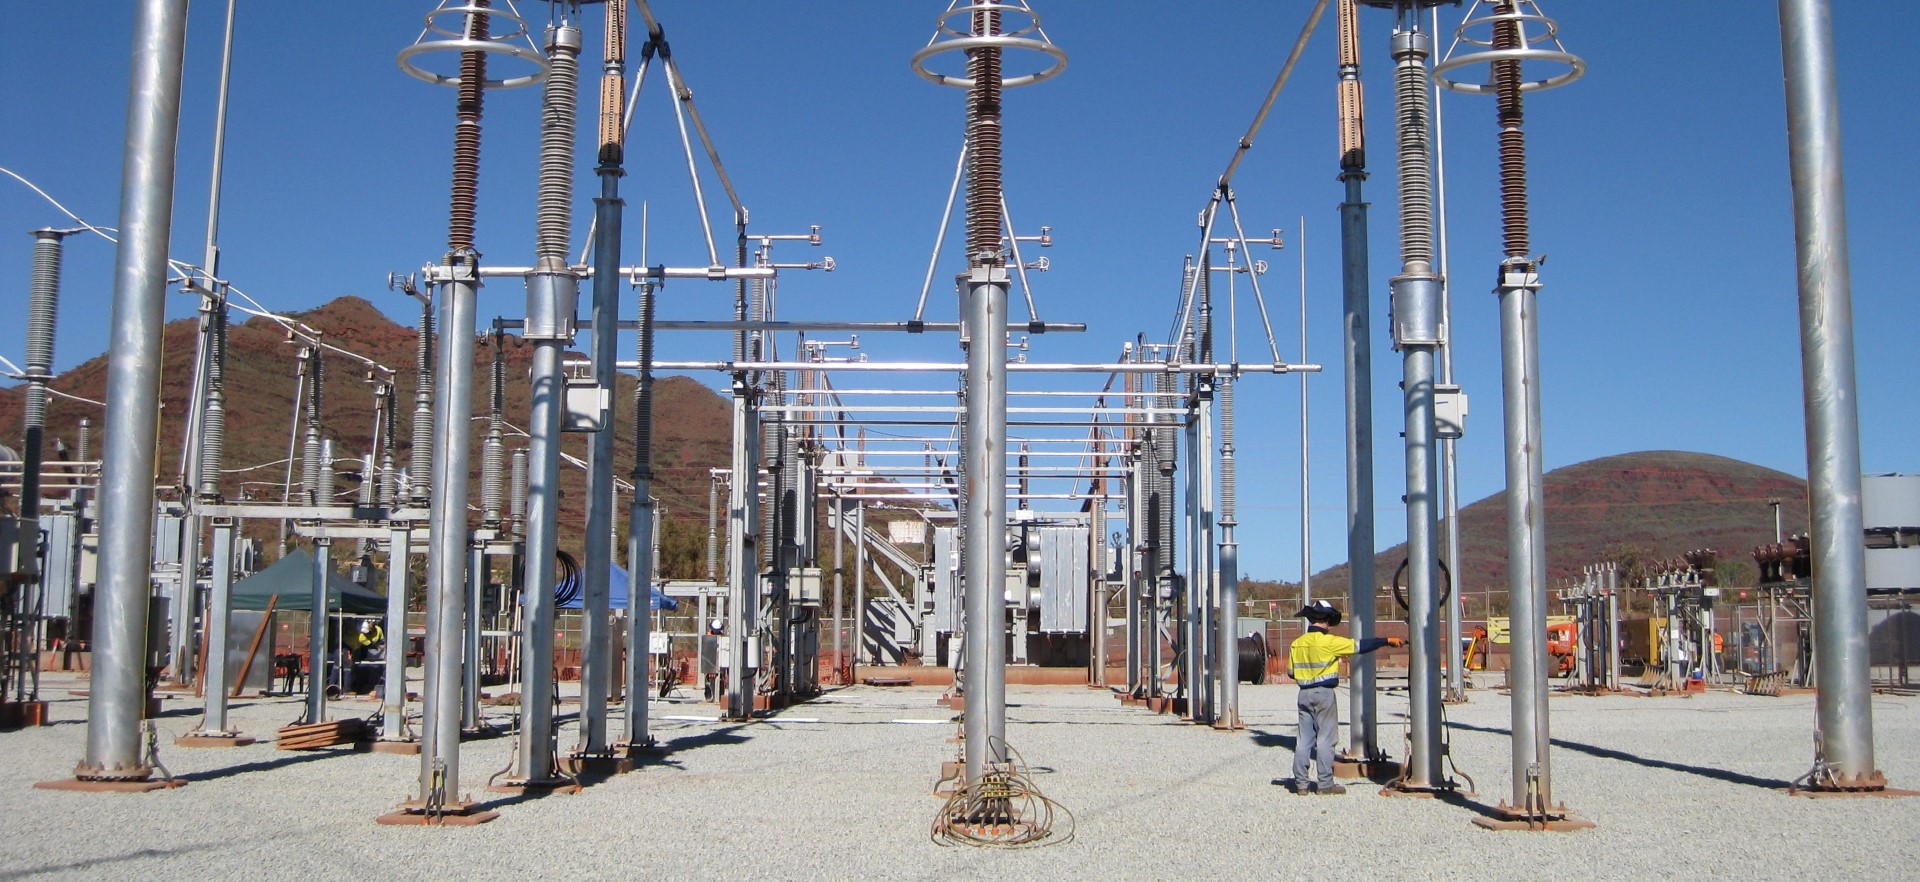 Learn about earthing system testing methods